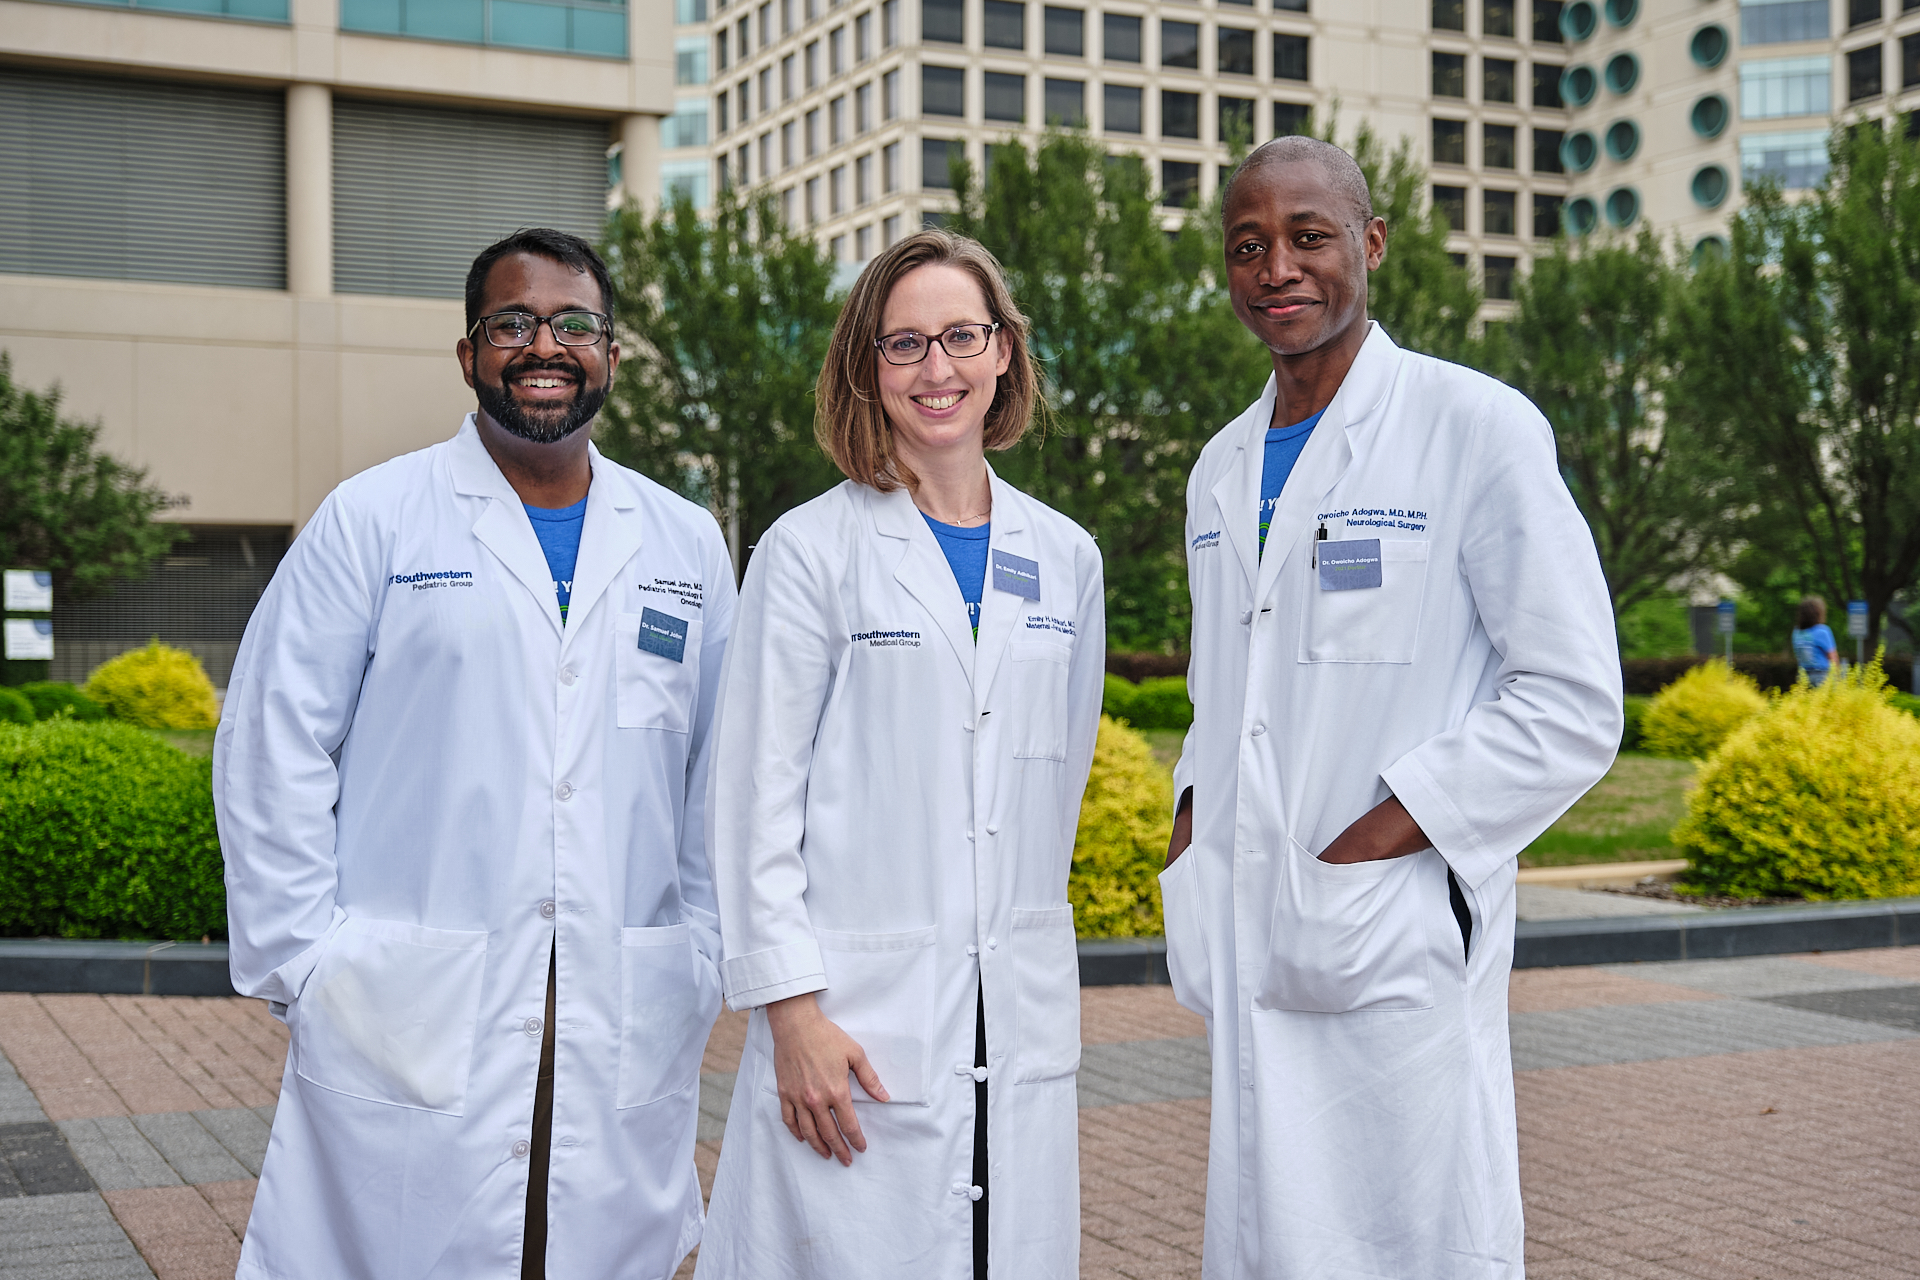 Pictured on the campus of UT Southwestern are the 2021 DocStars. These researchers have been awarded The Cary Council's Early-stage Research Grants.